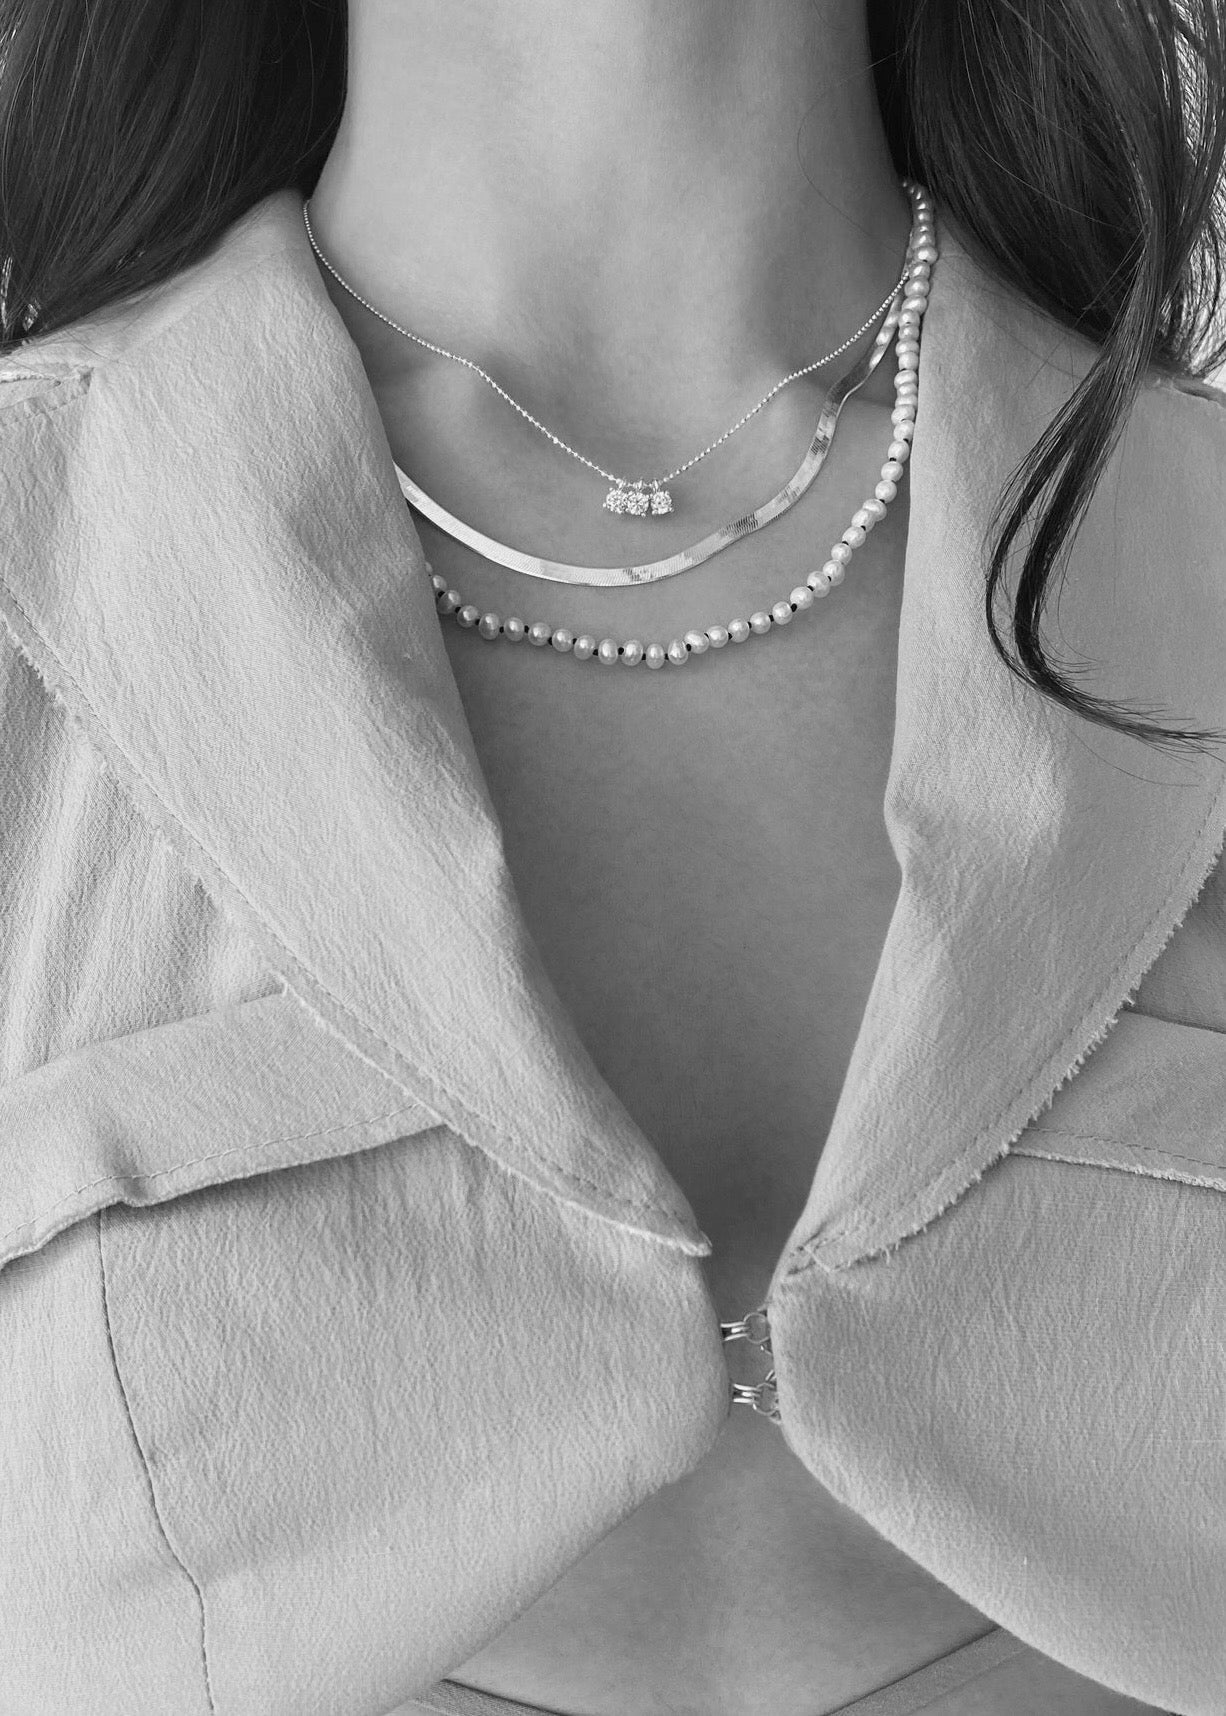 All Summer Long pearl necklace